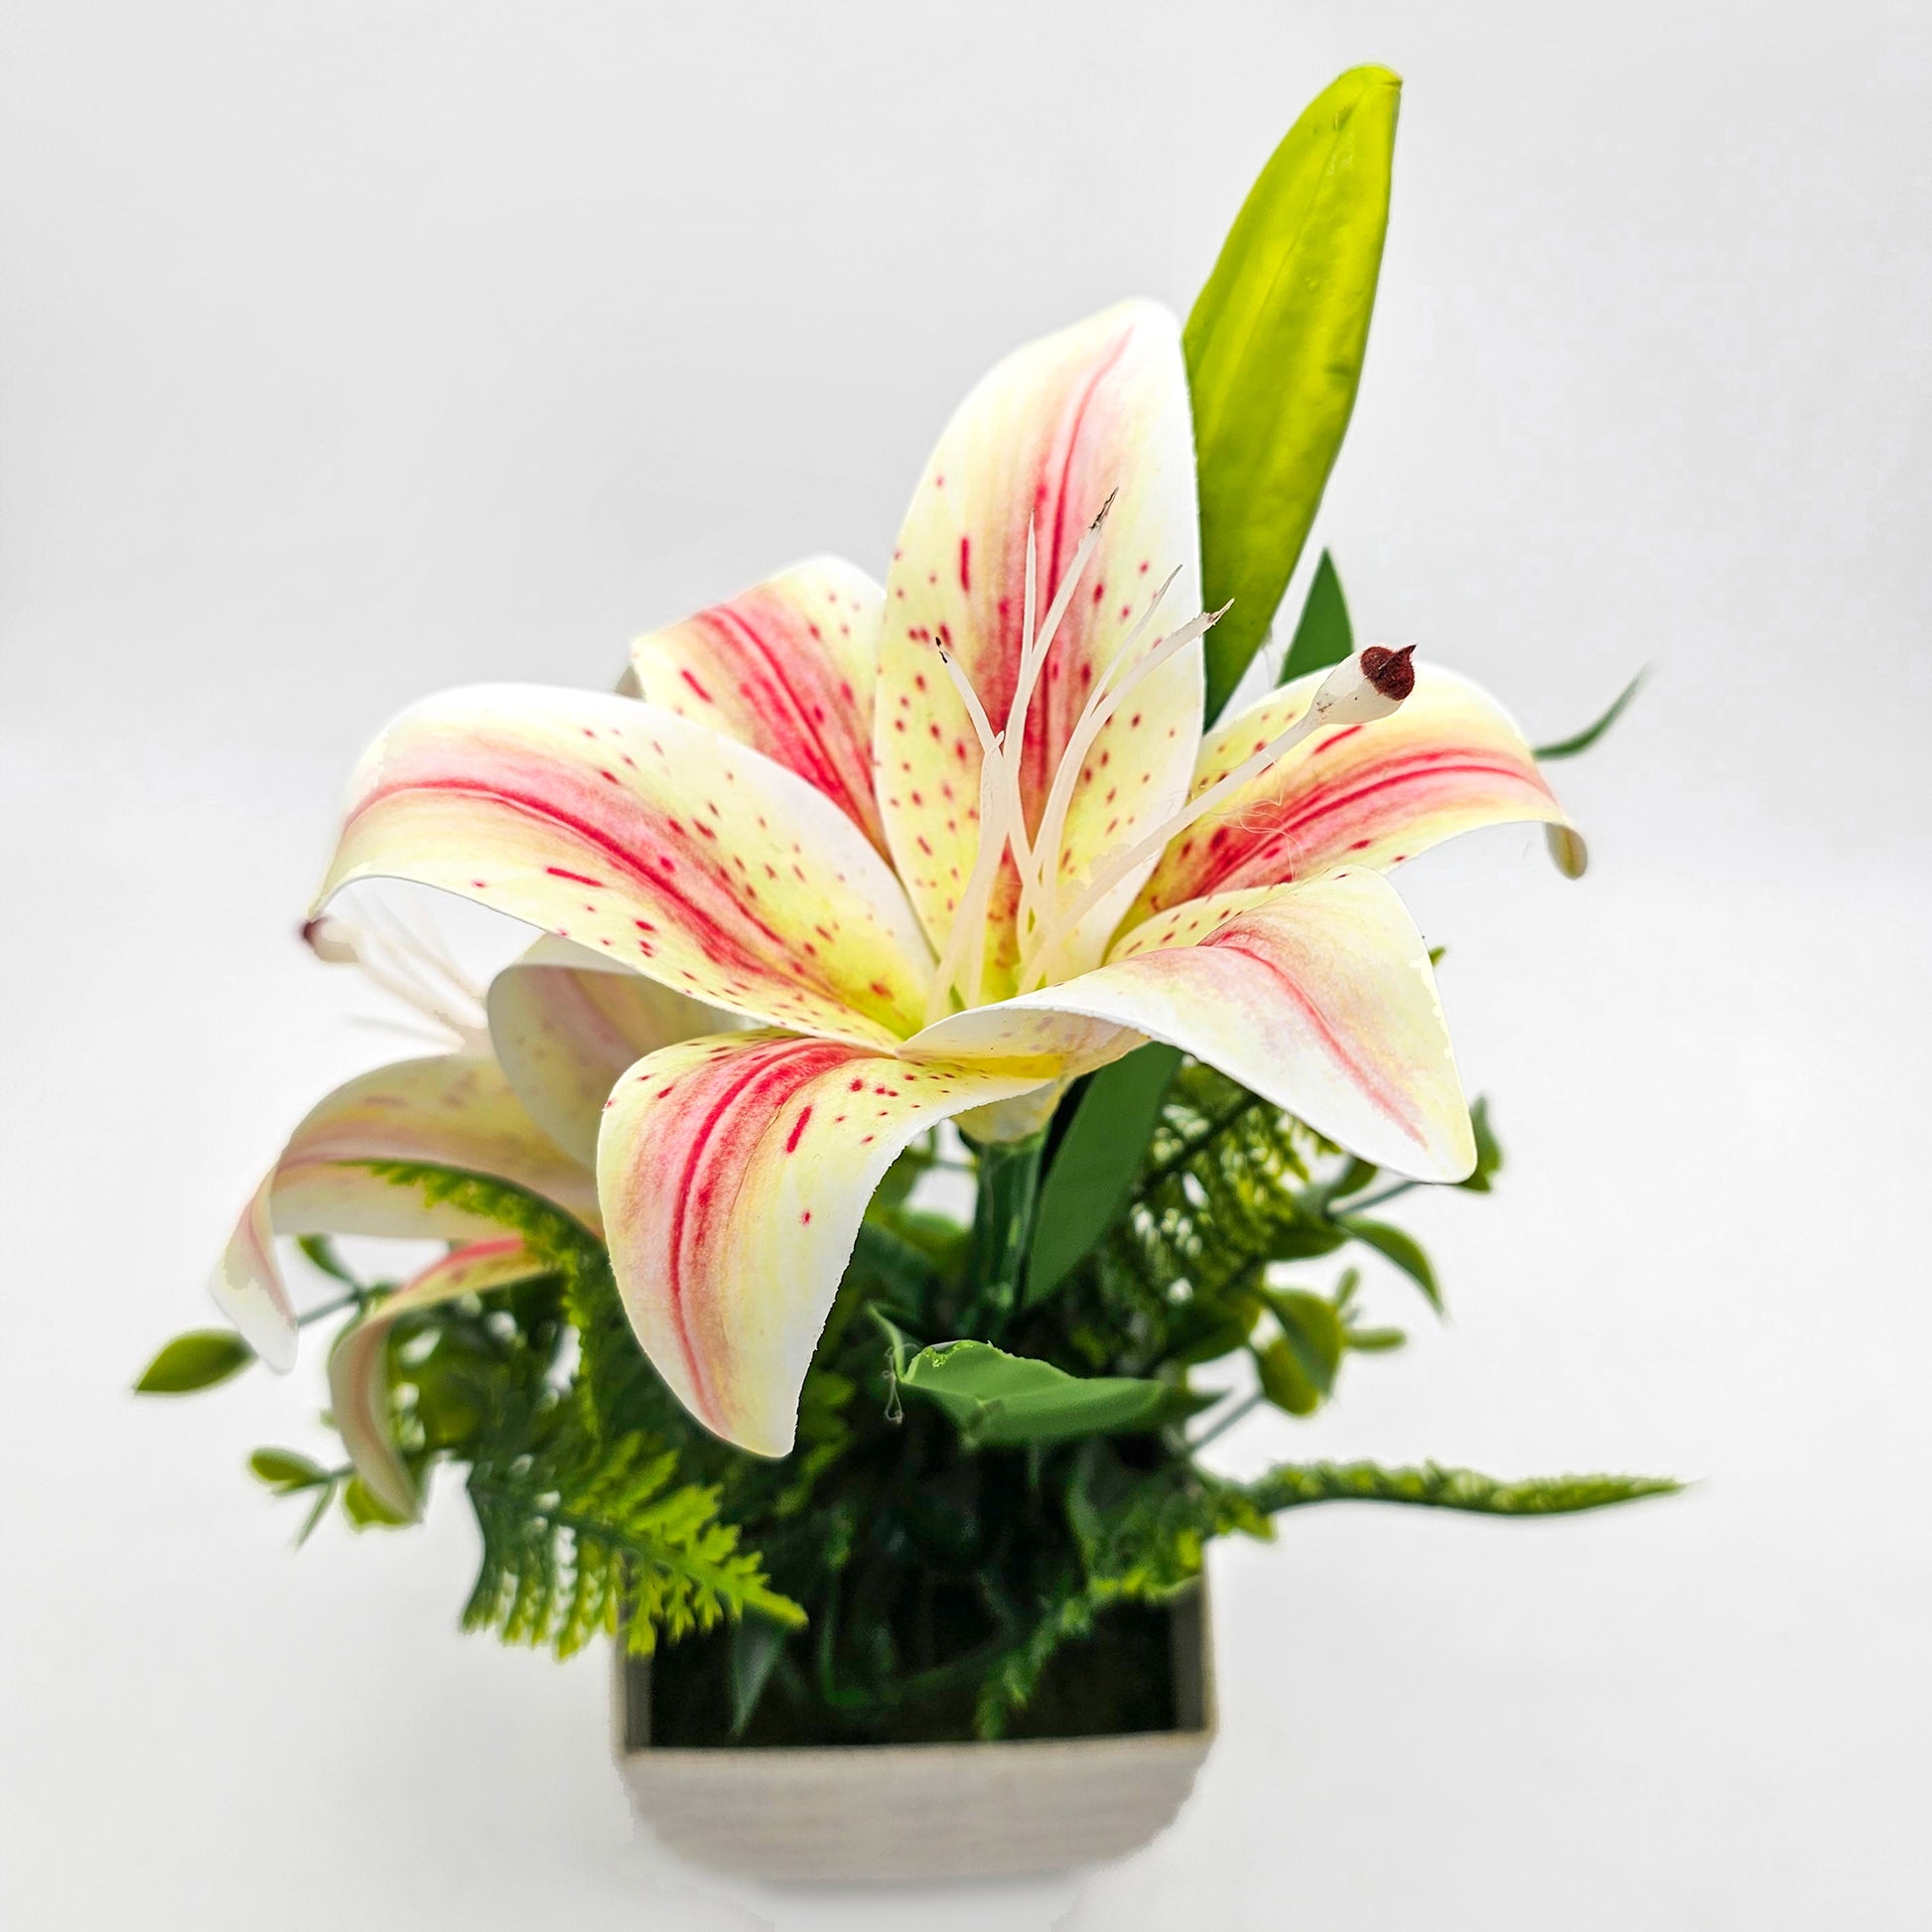  lily flowers wedding gifts flower decoration